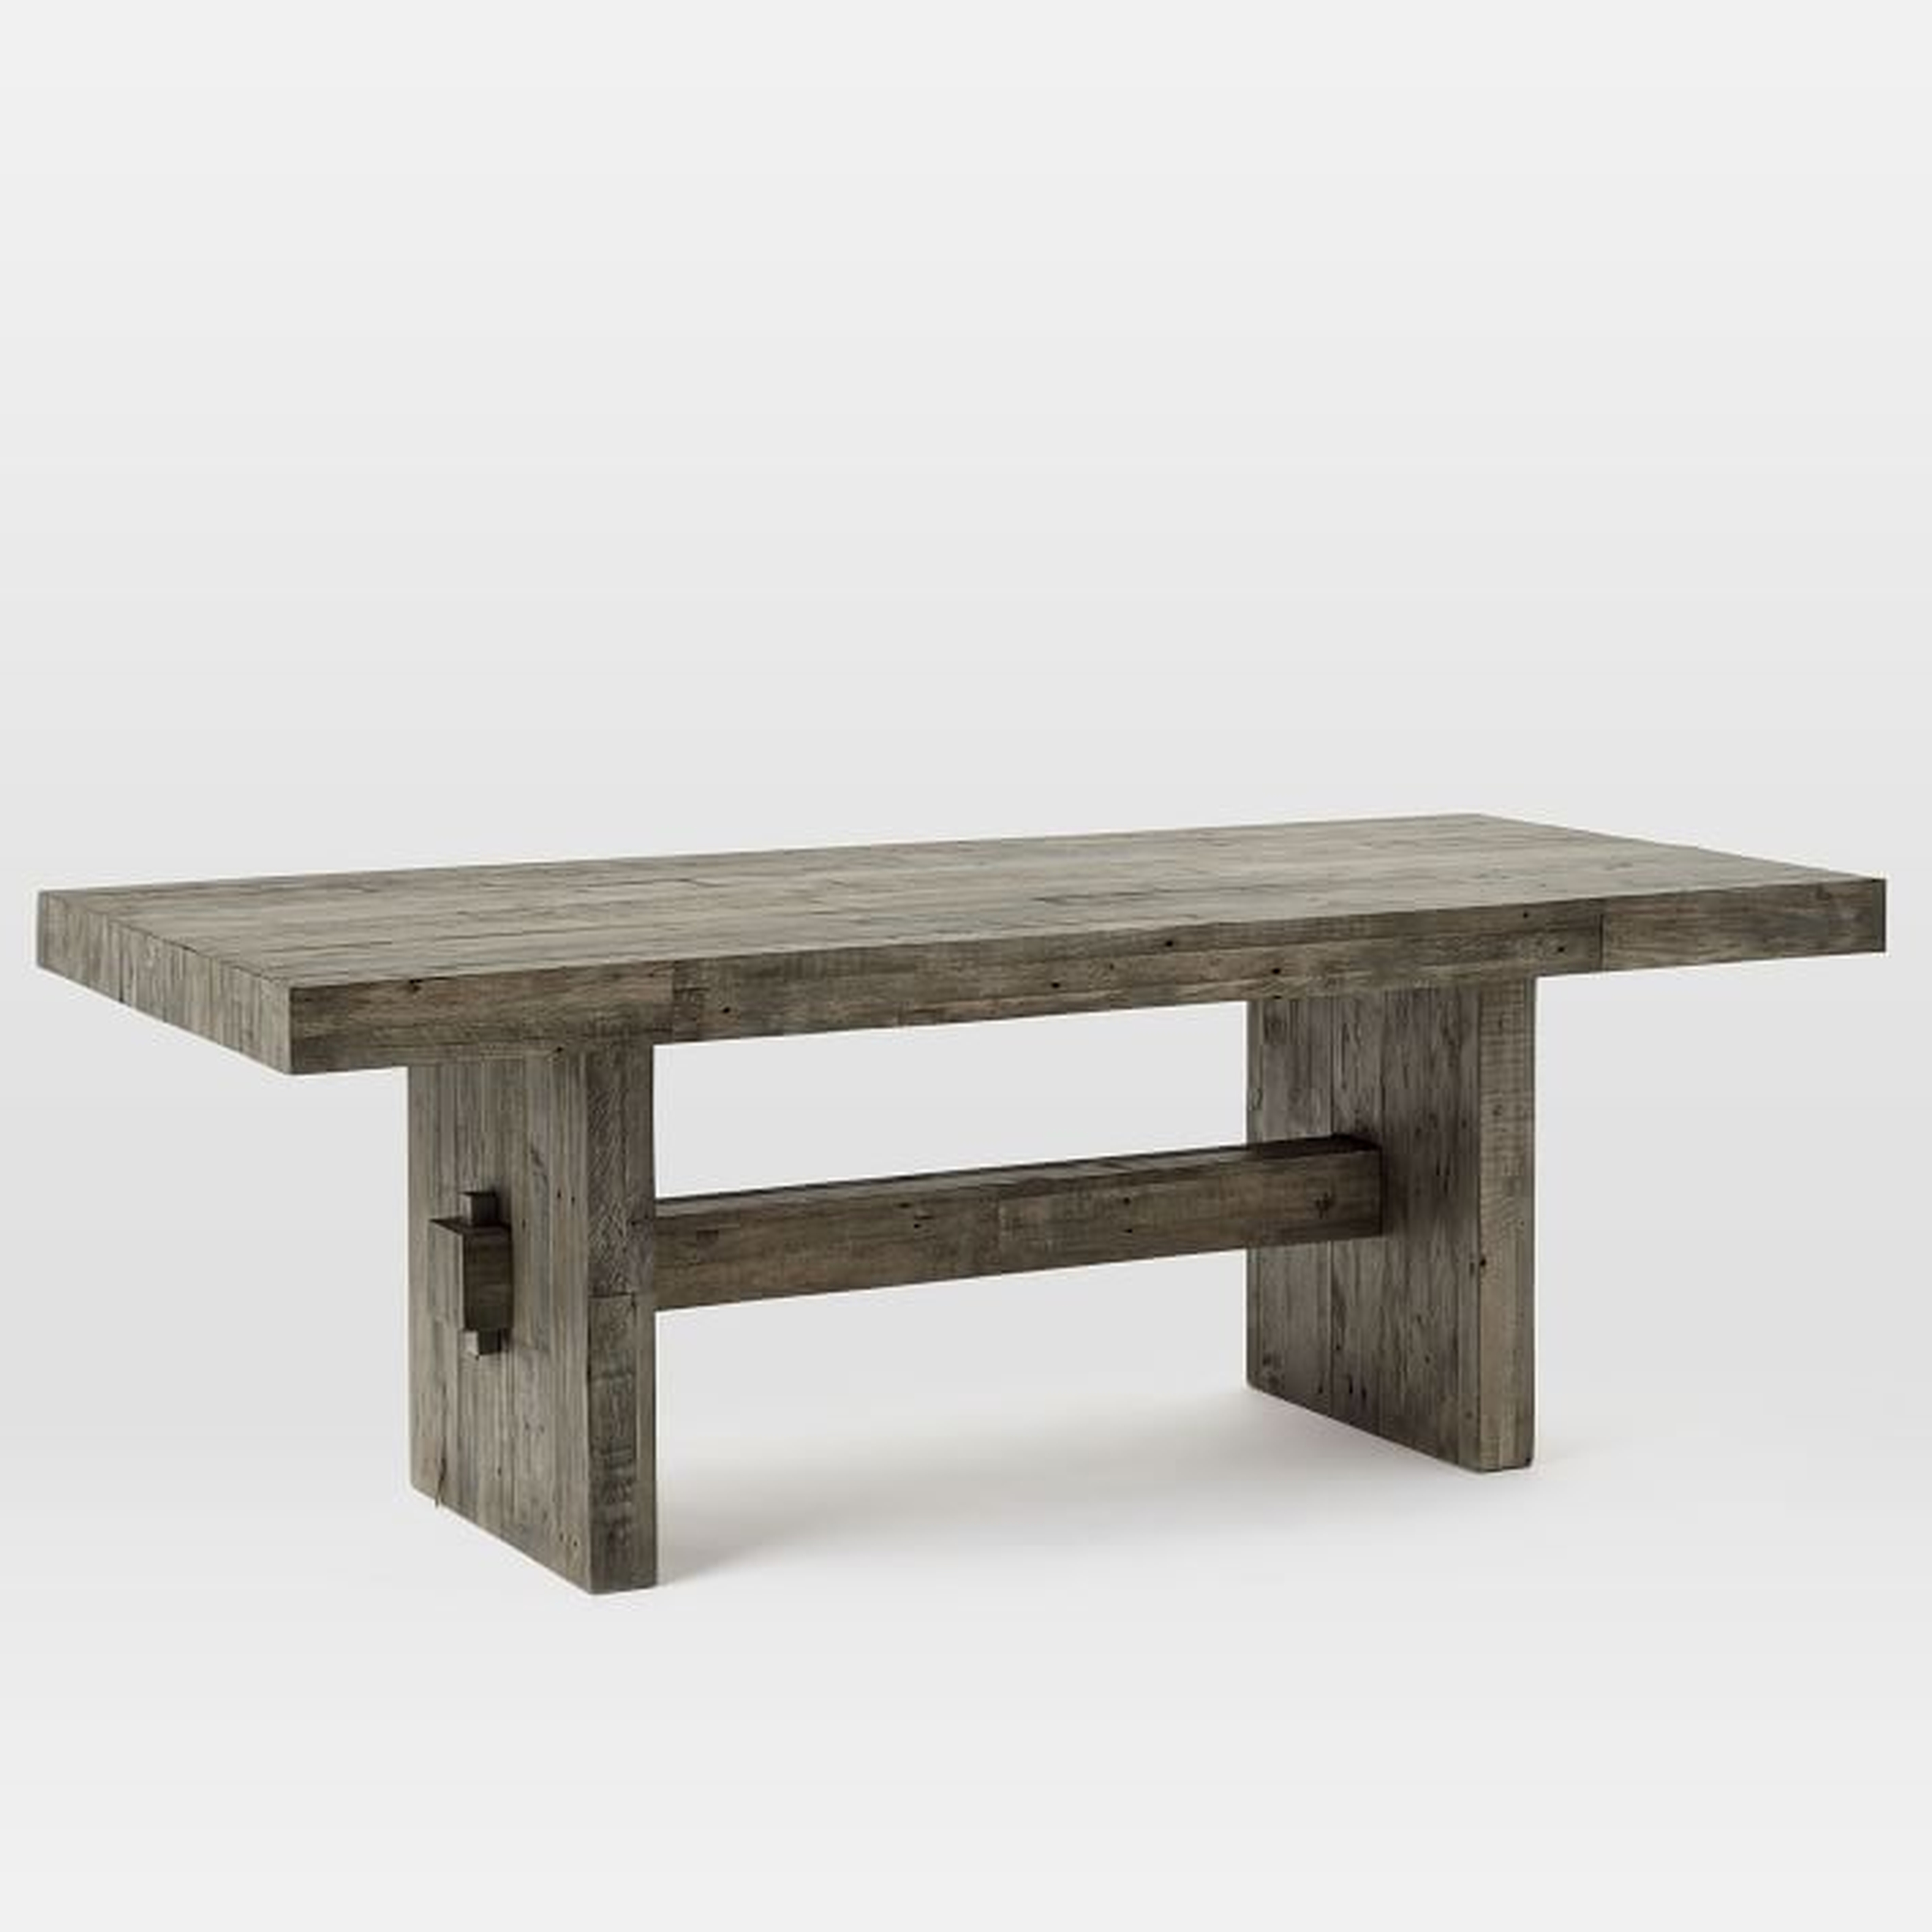 Emmerson® Reclaimed Wood Dining Table - Stone Gray - West Elm